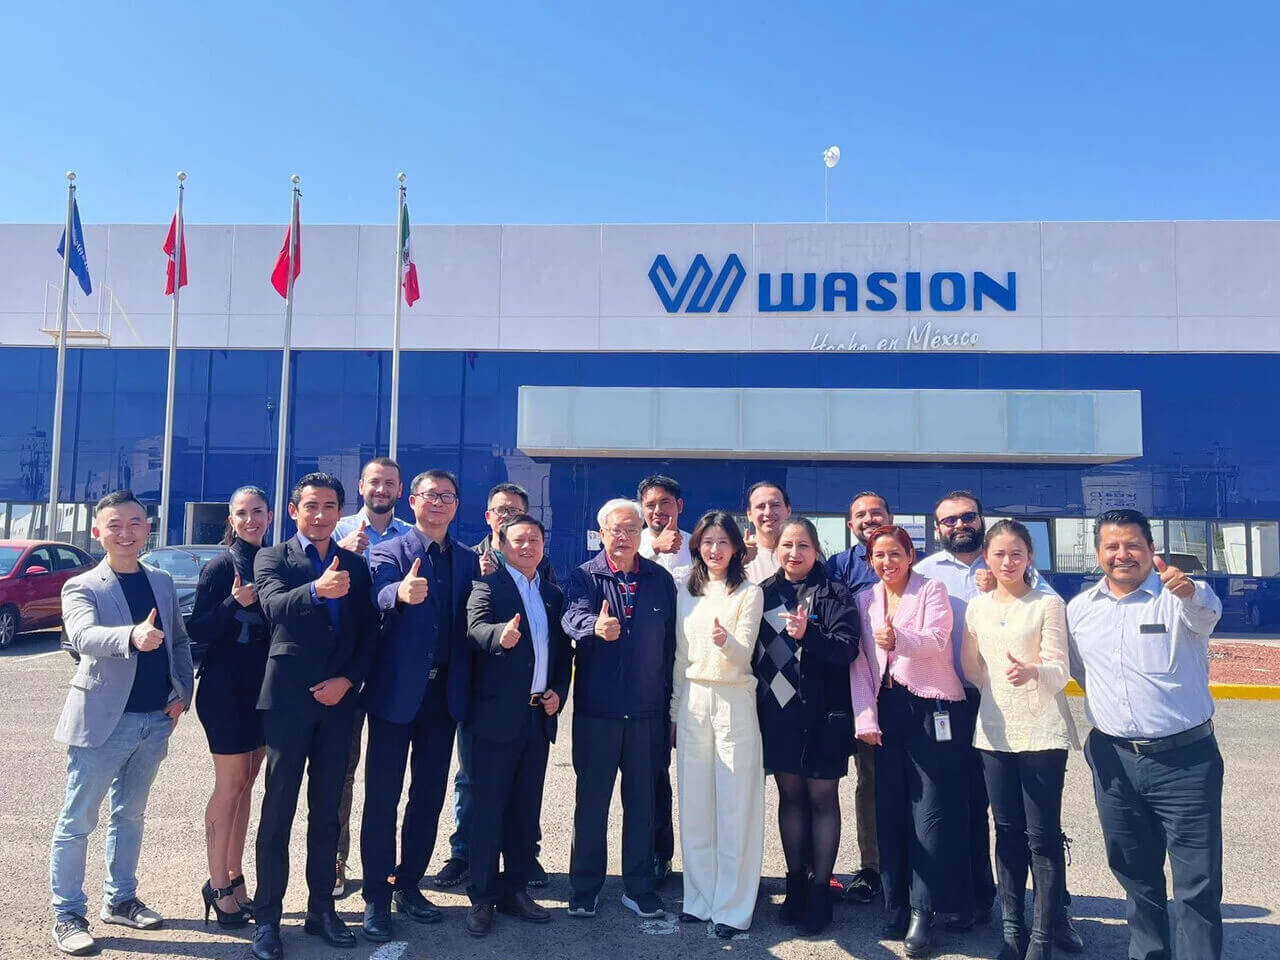 New Smart Meter Facility: Wasion to Set Up HUF 4 Billion R+D Base in Hungary